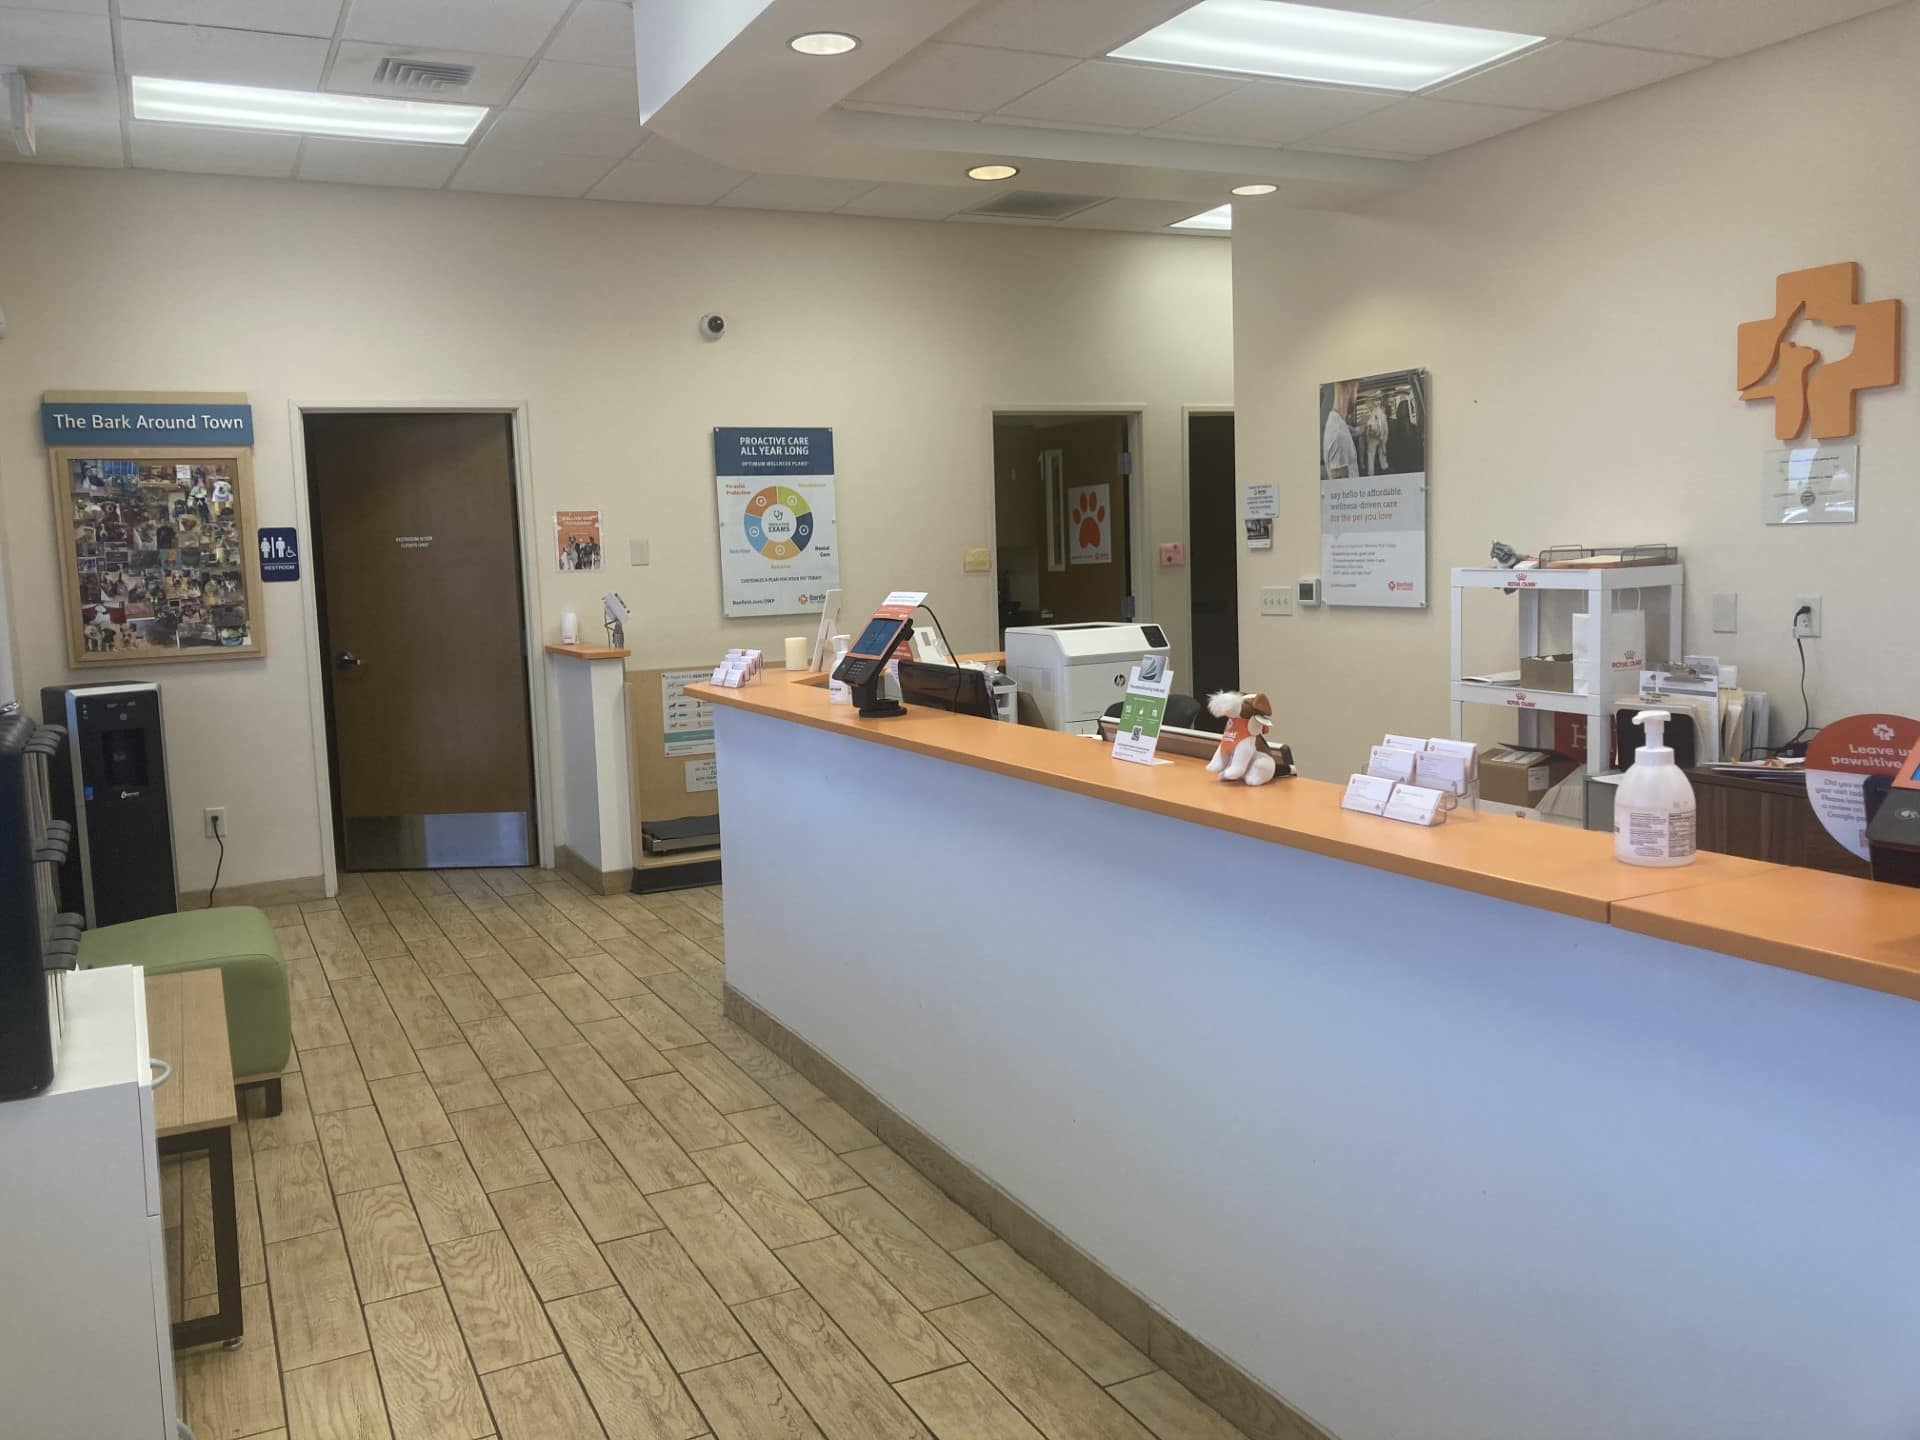 The front desk/waiting area of the Shea location